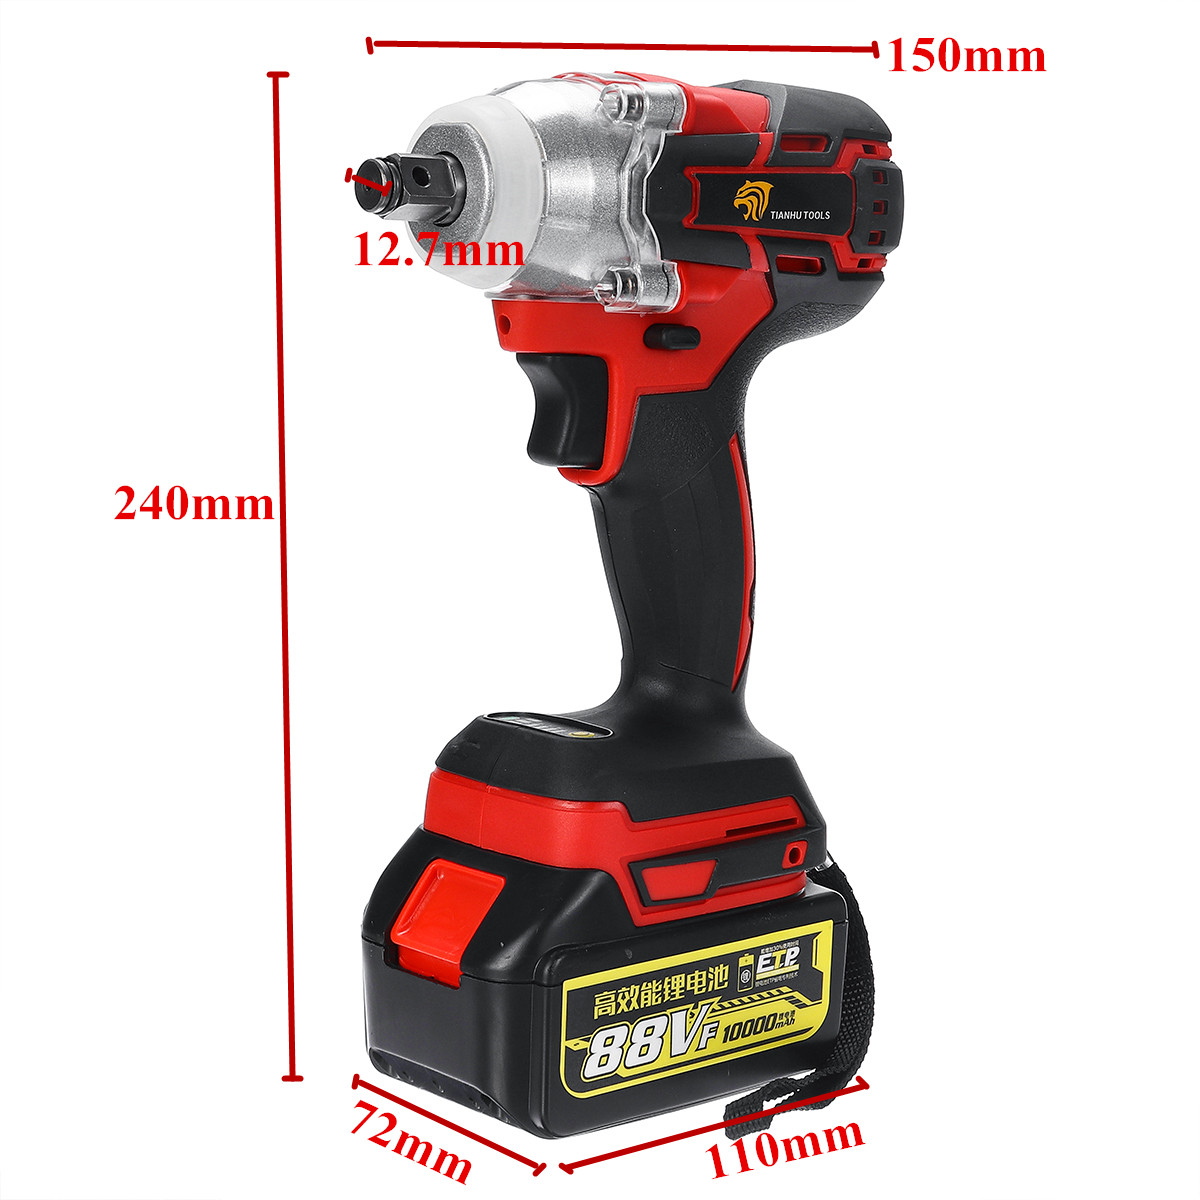 88VF-10000mAh-520NM-High-Torque-Cordless-Brushless-Electric-Wrench-with-Rechargeable-Battery-1782562-2